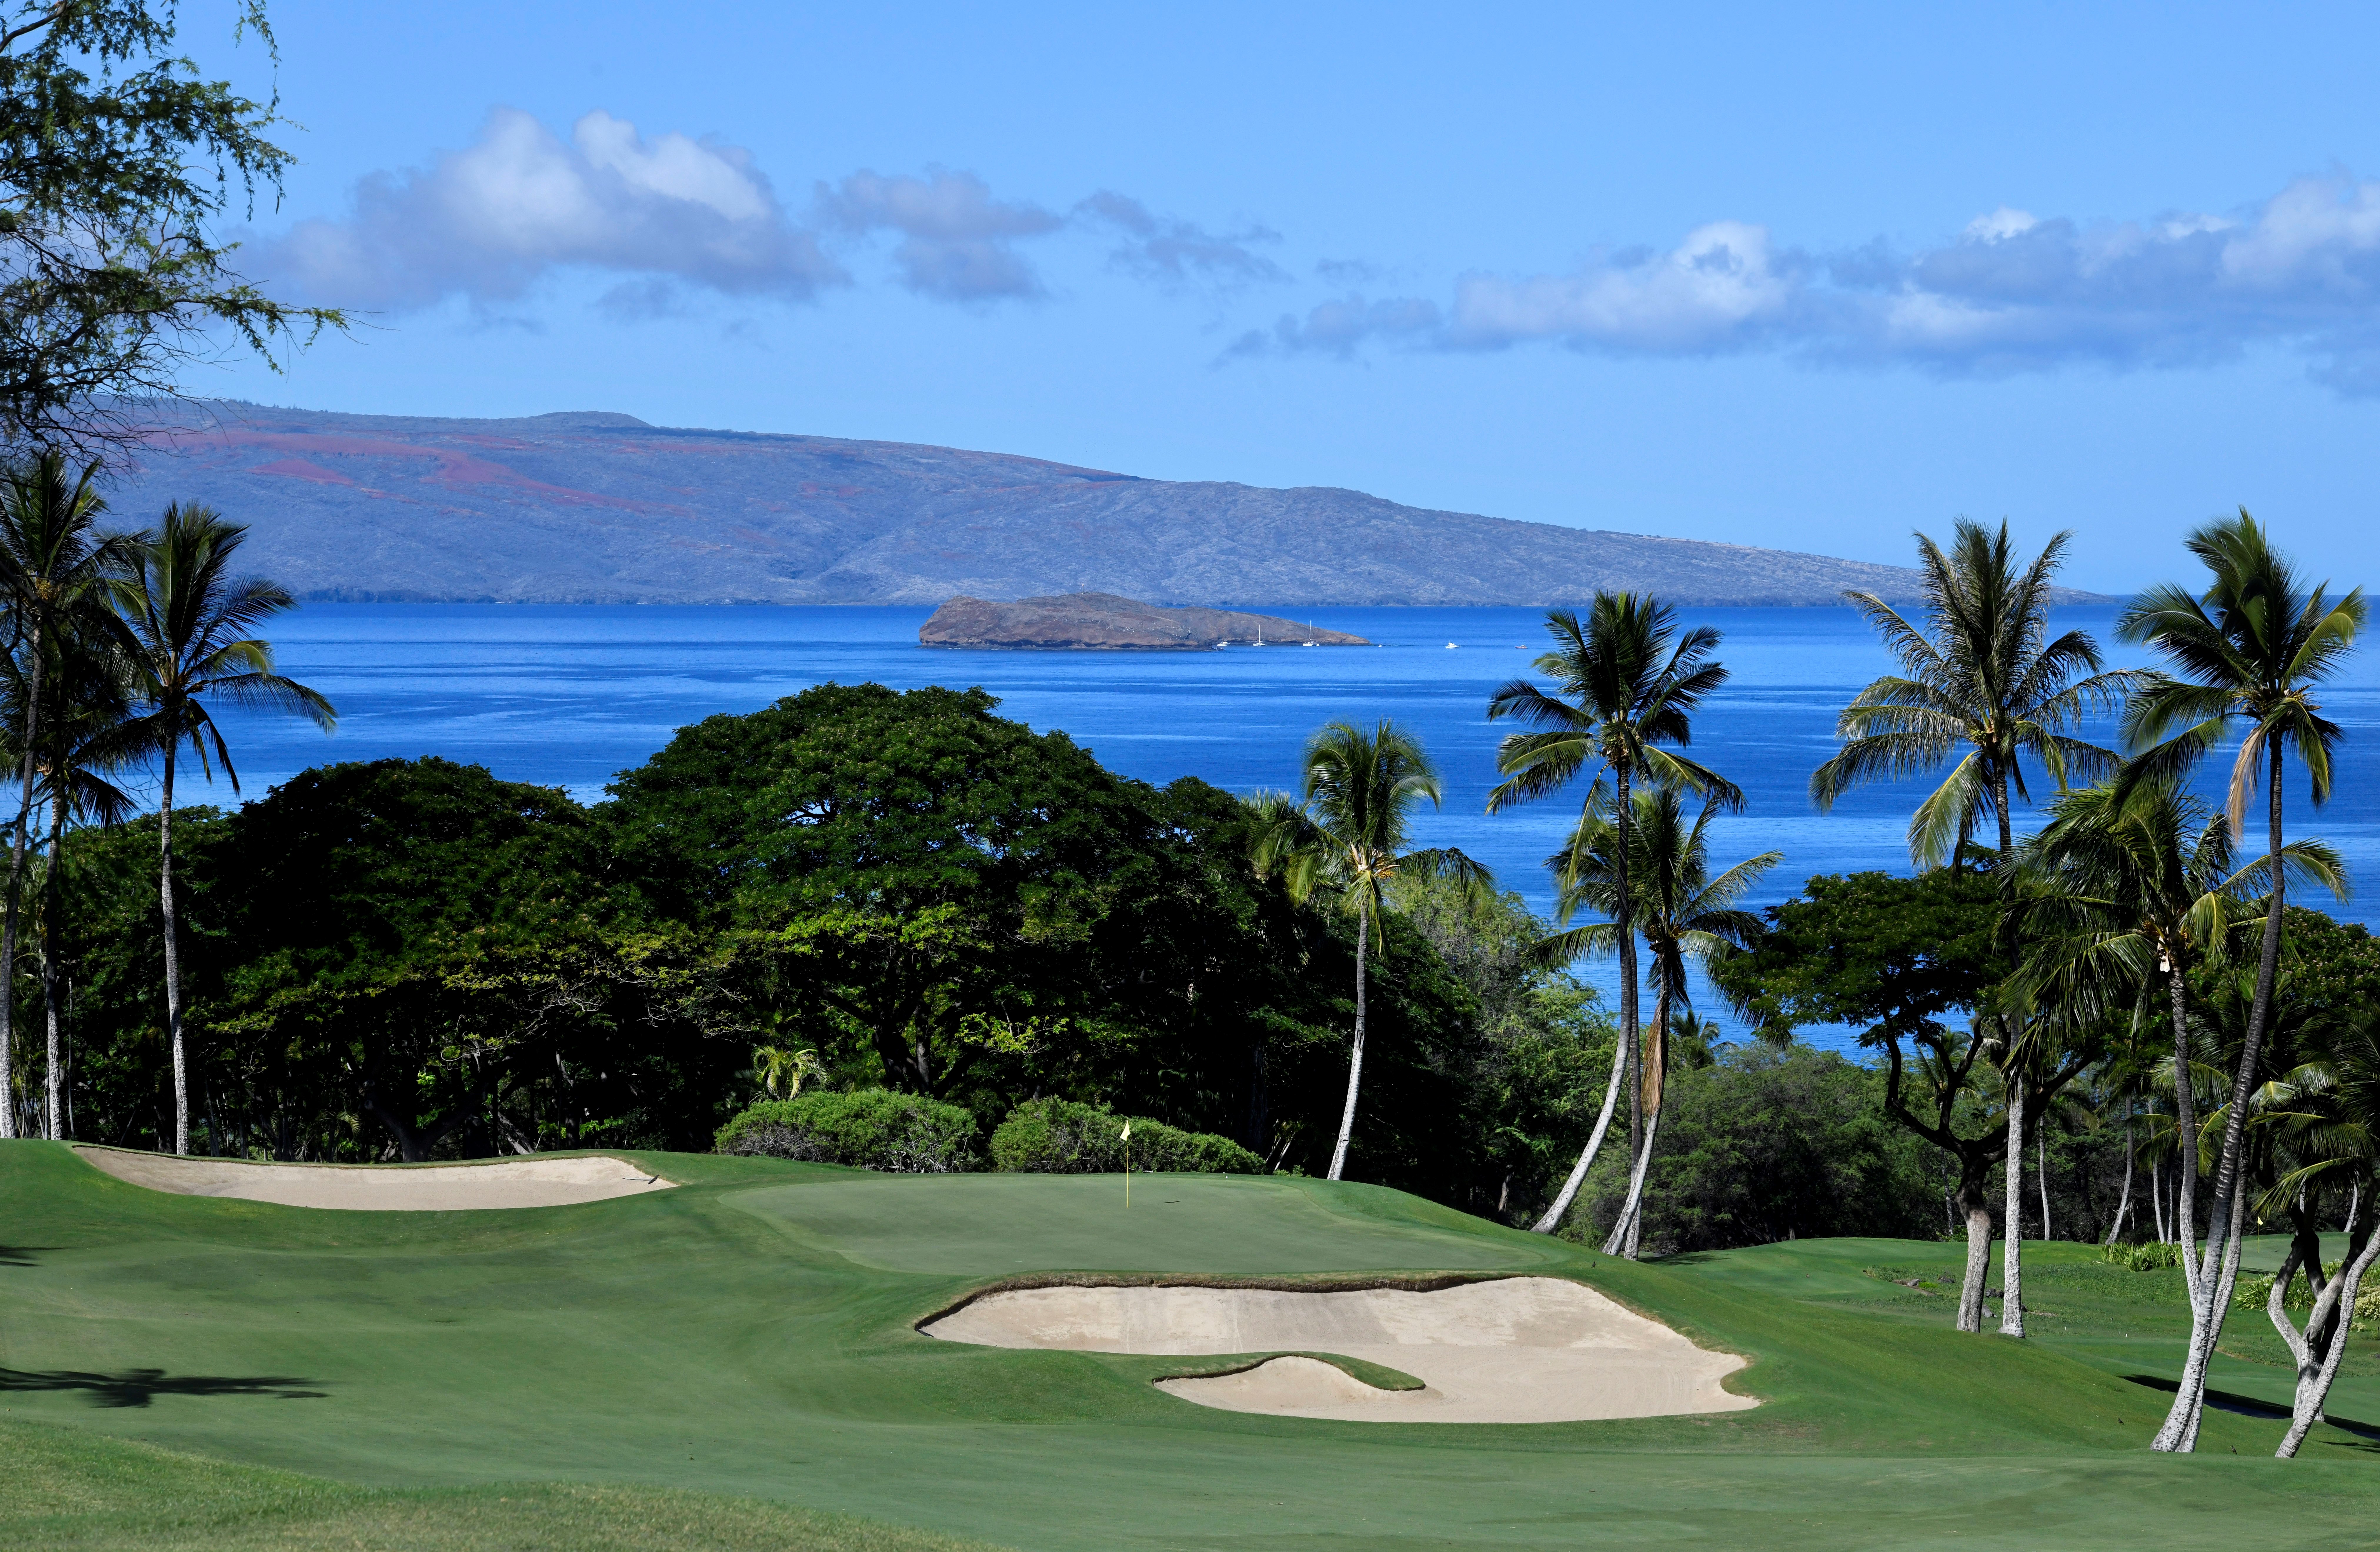 Image of a golf course overlooking the ocean